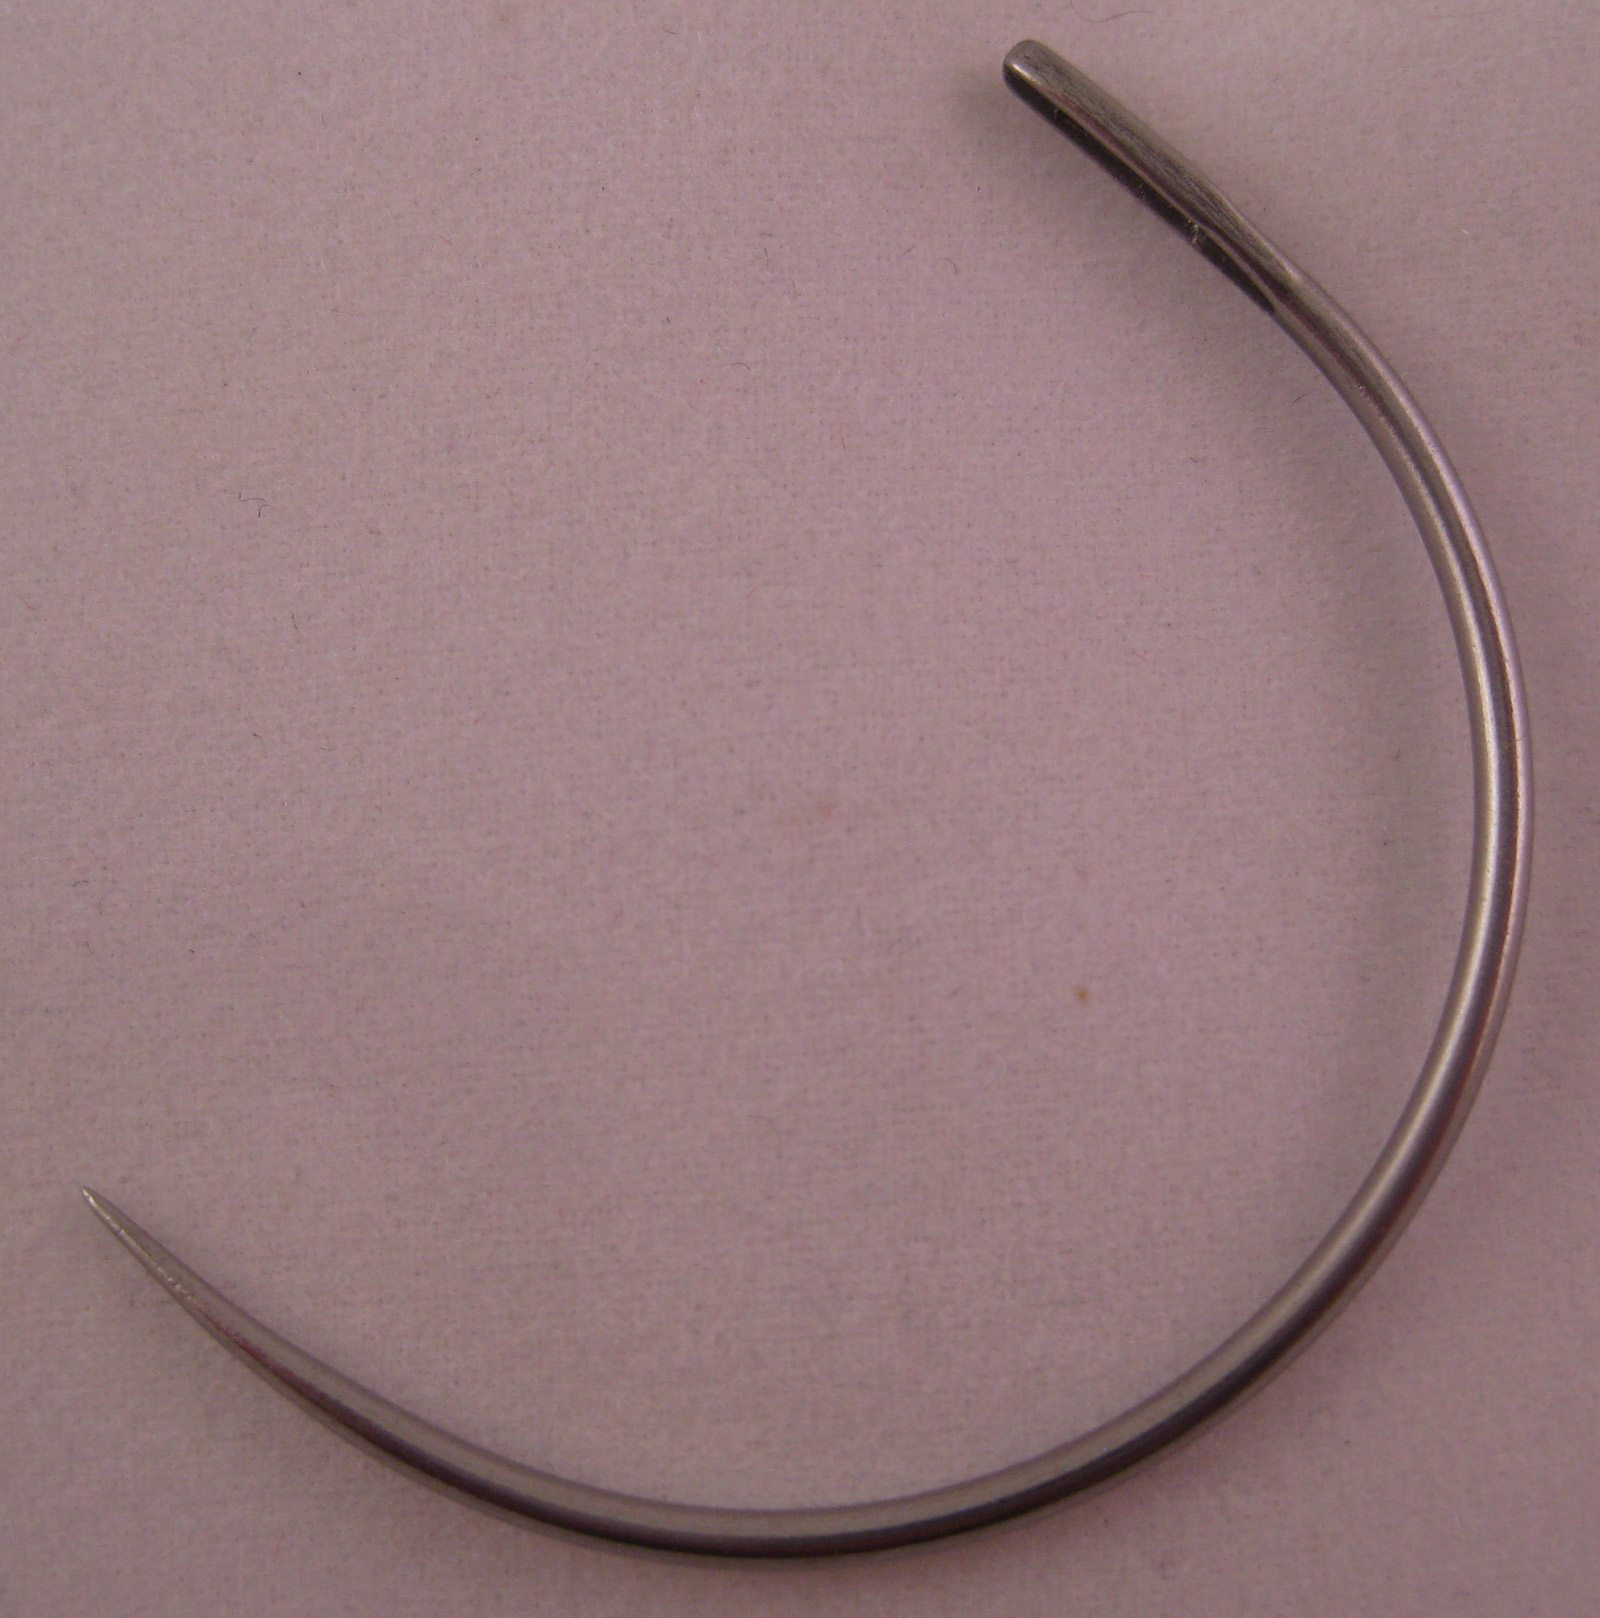 Lineco Curved Sewing Needles